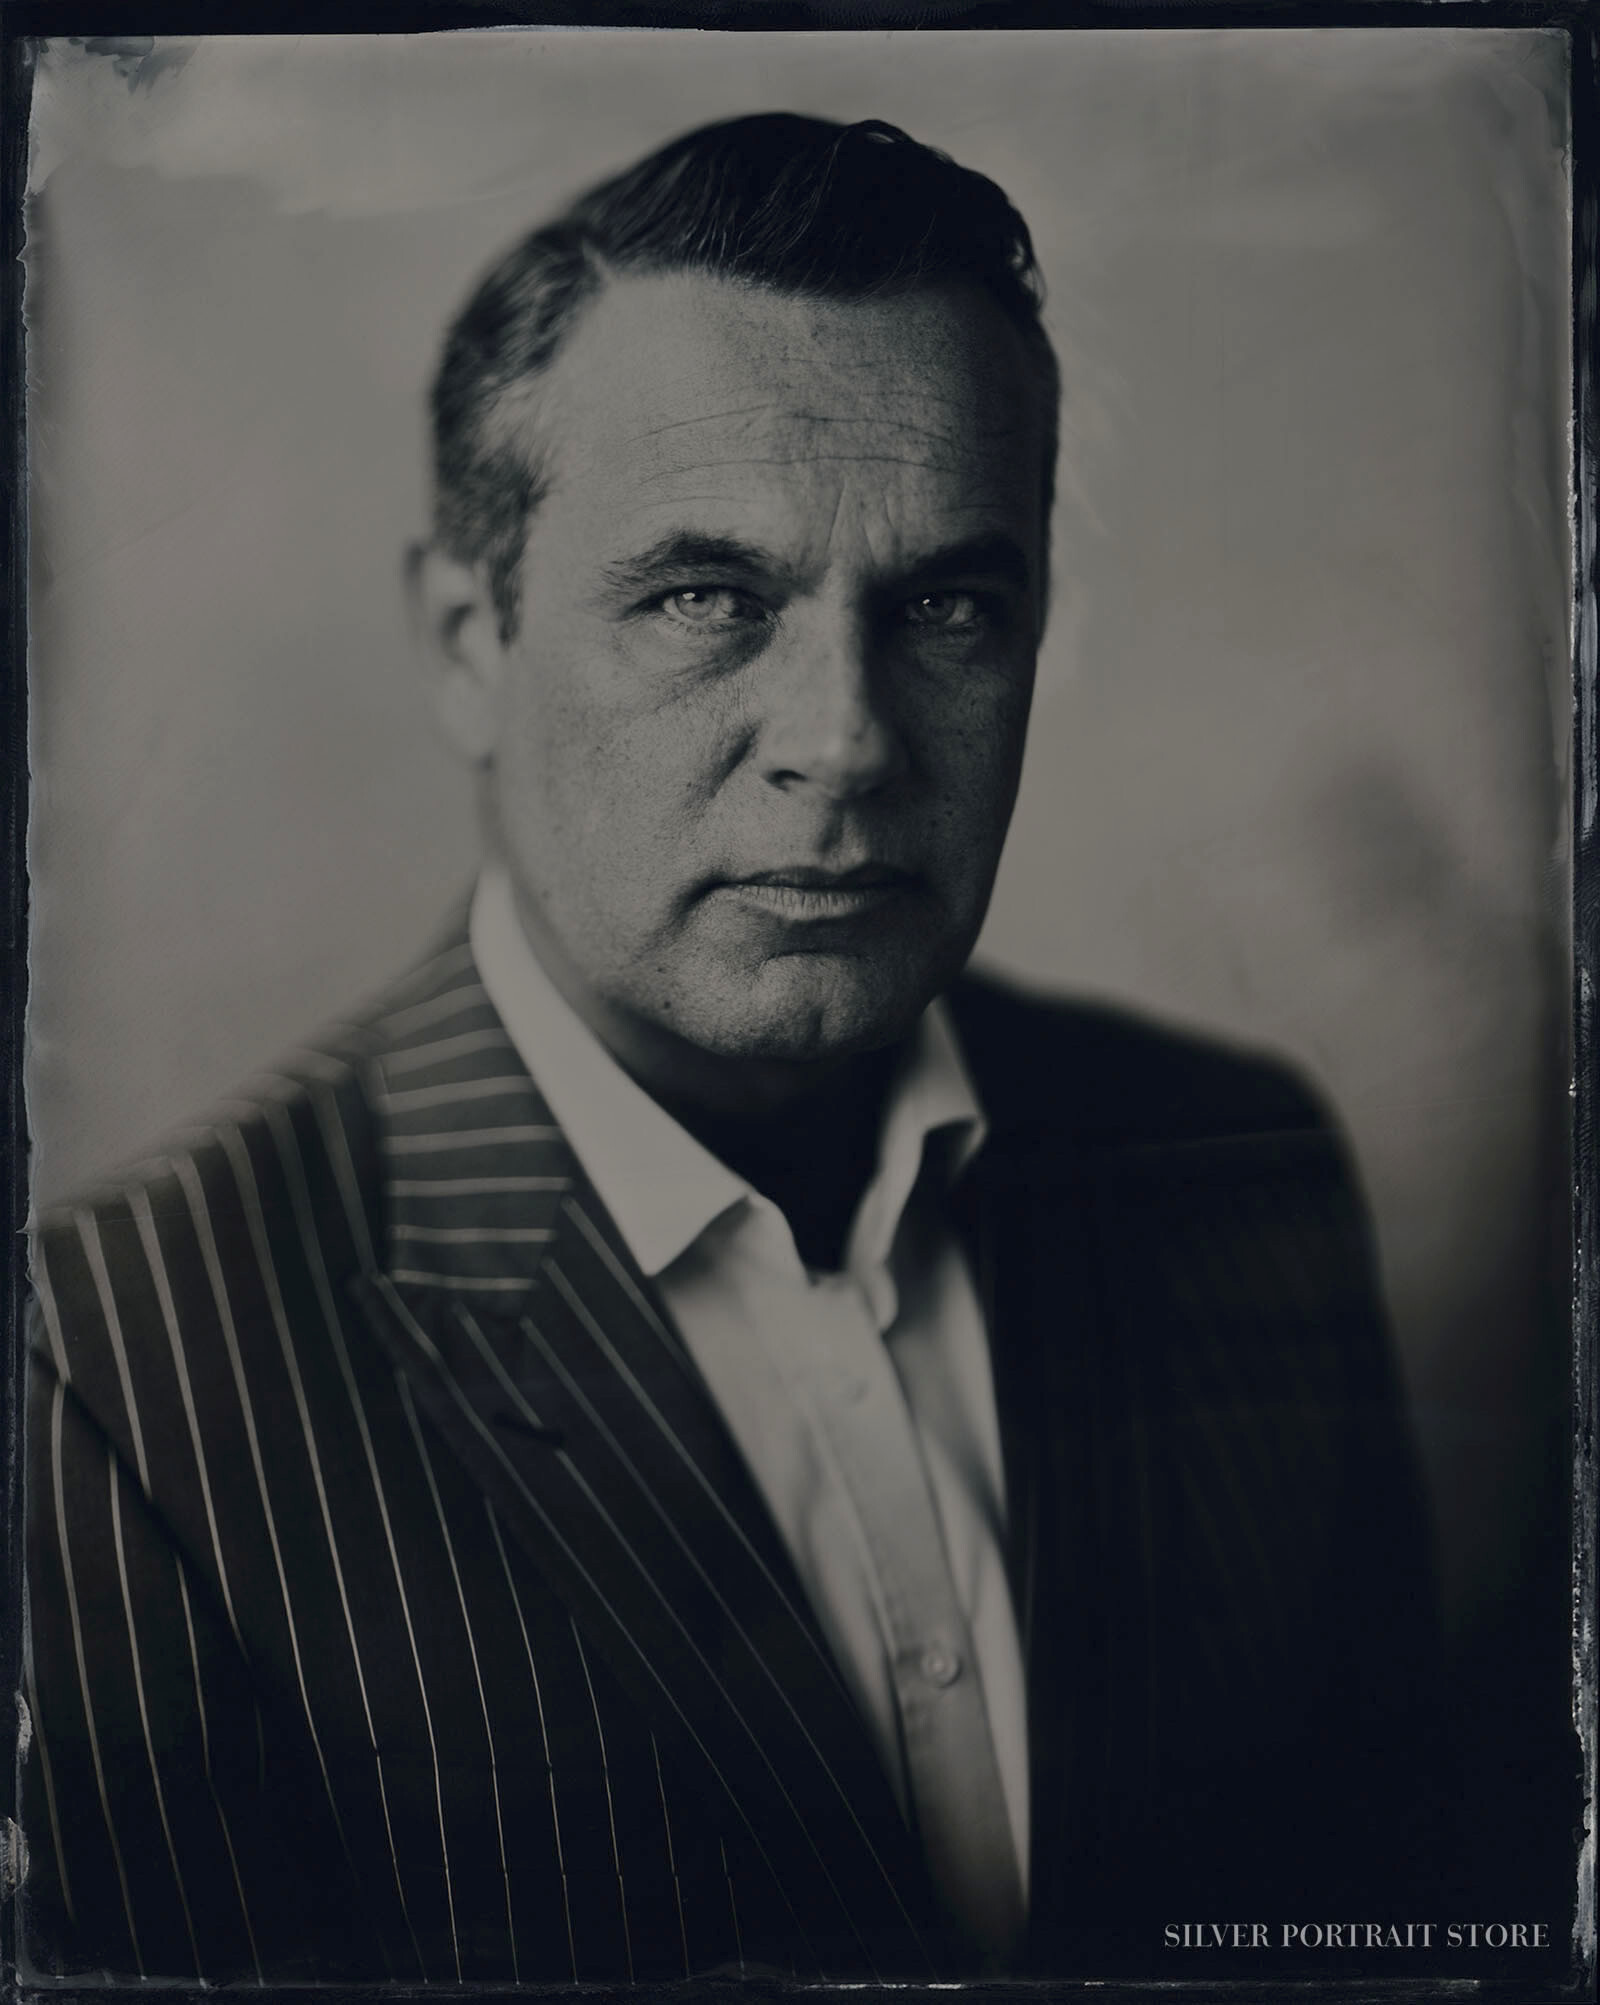 Dick-Silver Portrait Store-Scan from Wet plate collodion-Tintype 20 x 25 cm. Lokatie PTA/Realisme Beurs.